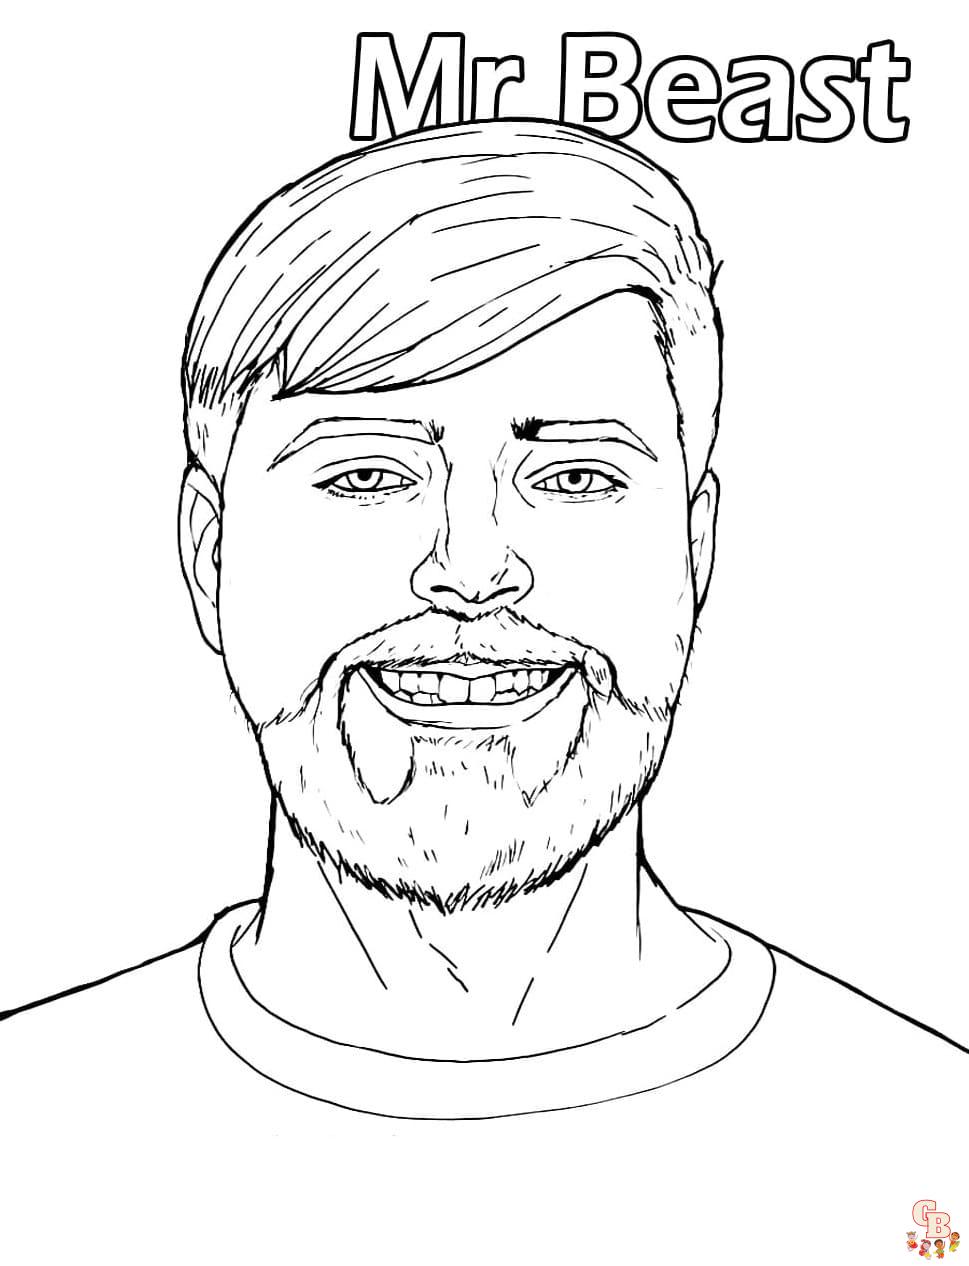 MrBeast coloring pages printable free